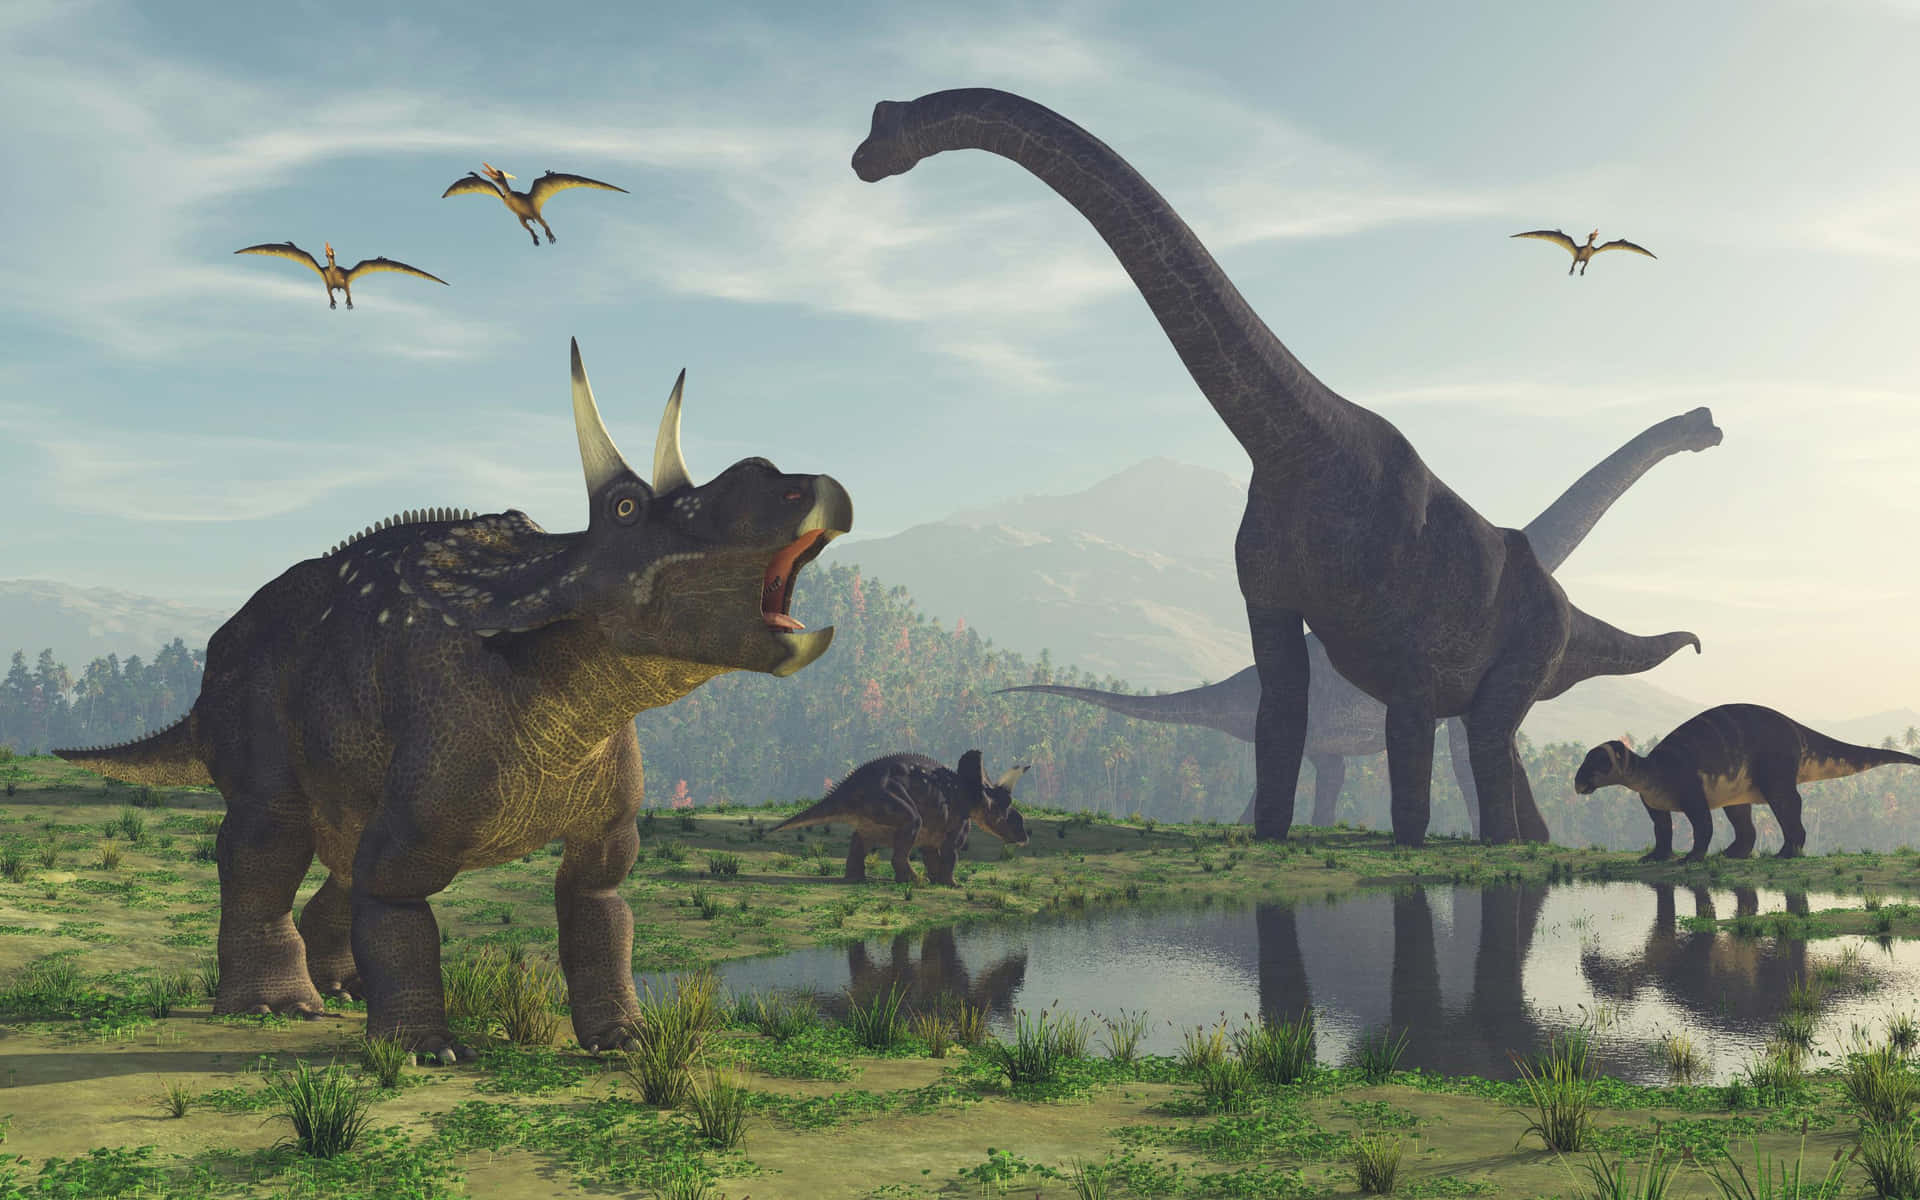 A Walk on the Wild Side: Discovering the 500-Toothed Dinosaur That Once Roamed the Earth